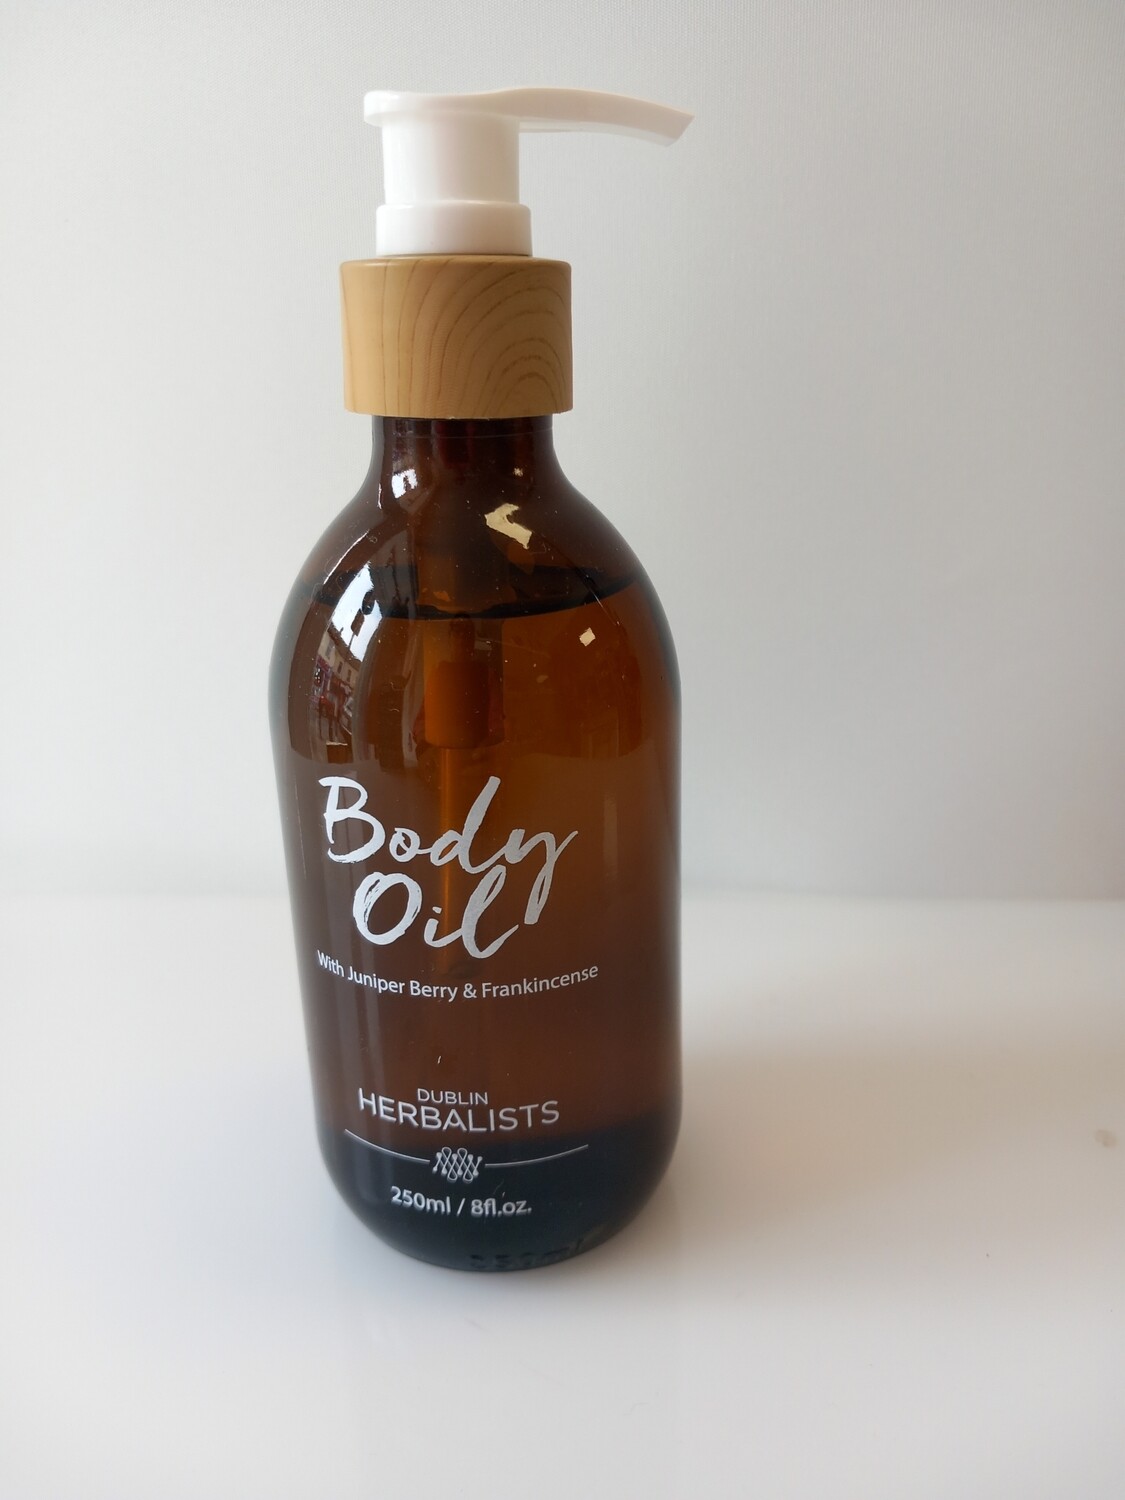 Dublin Herbalists - Body Oil with Juniper and Frankincense. 